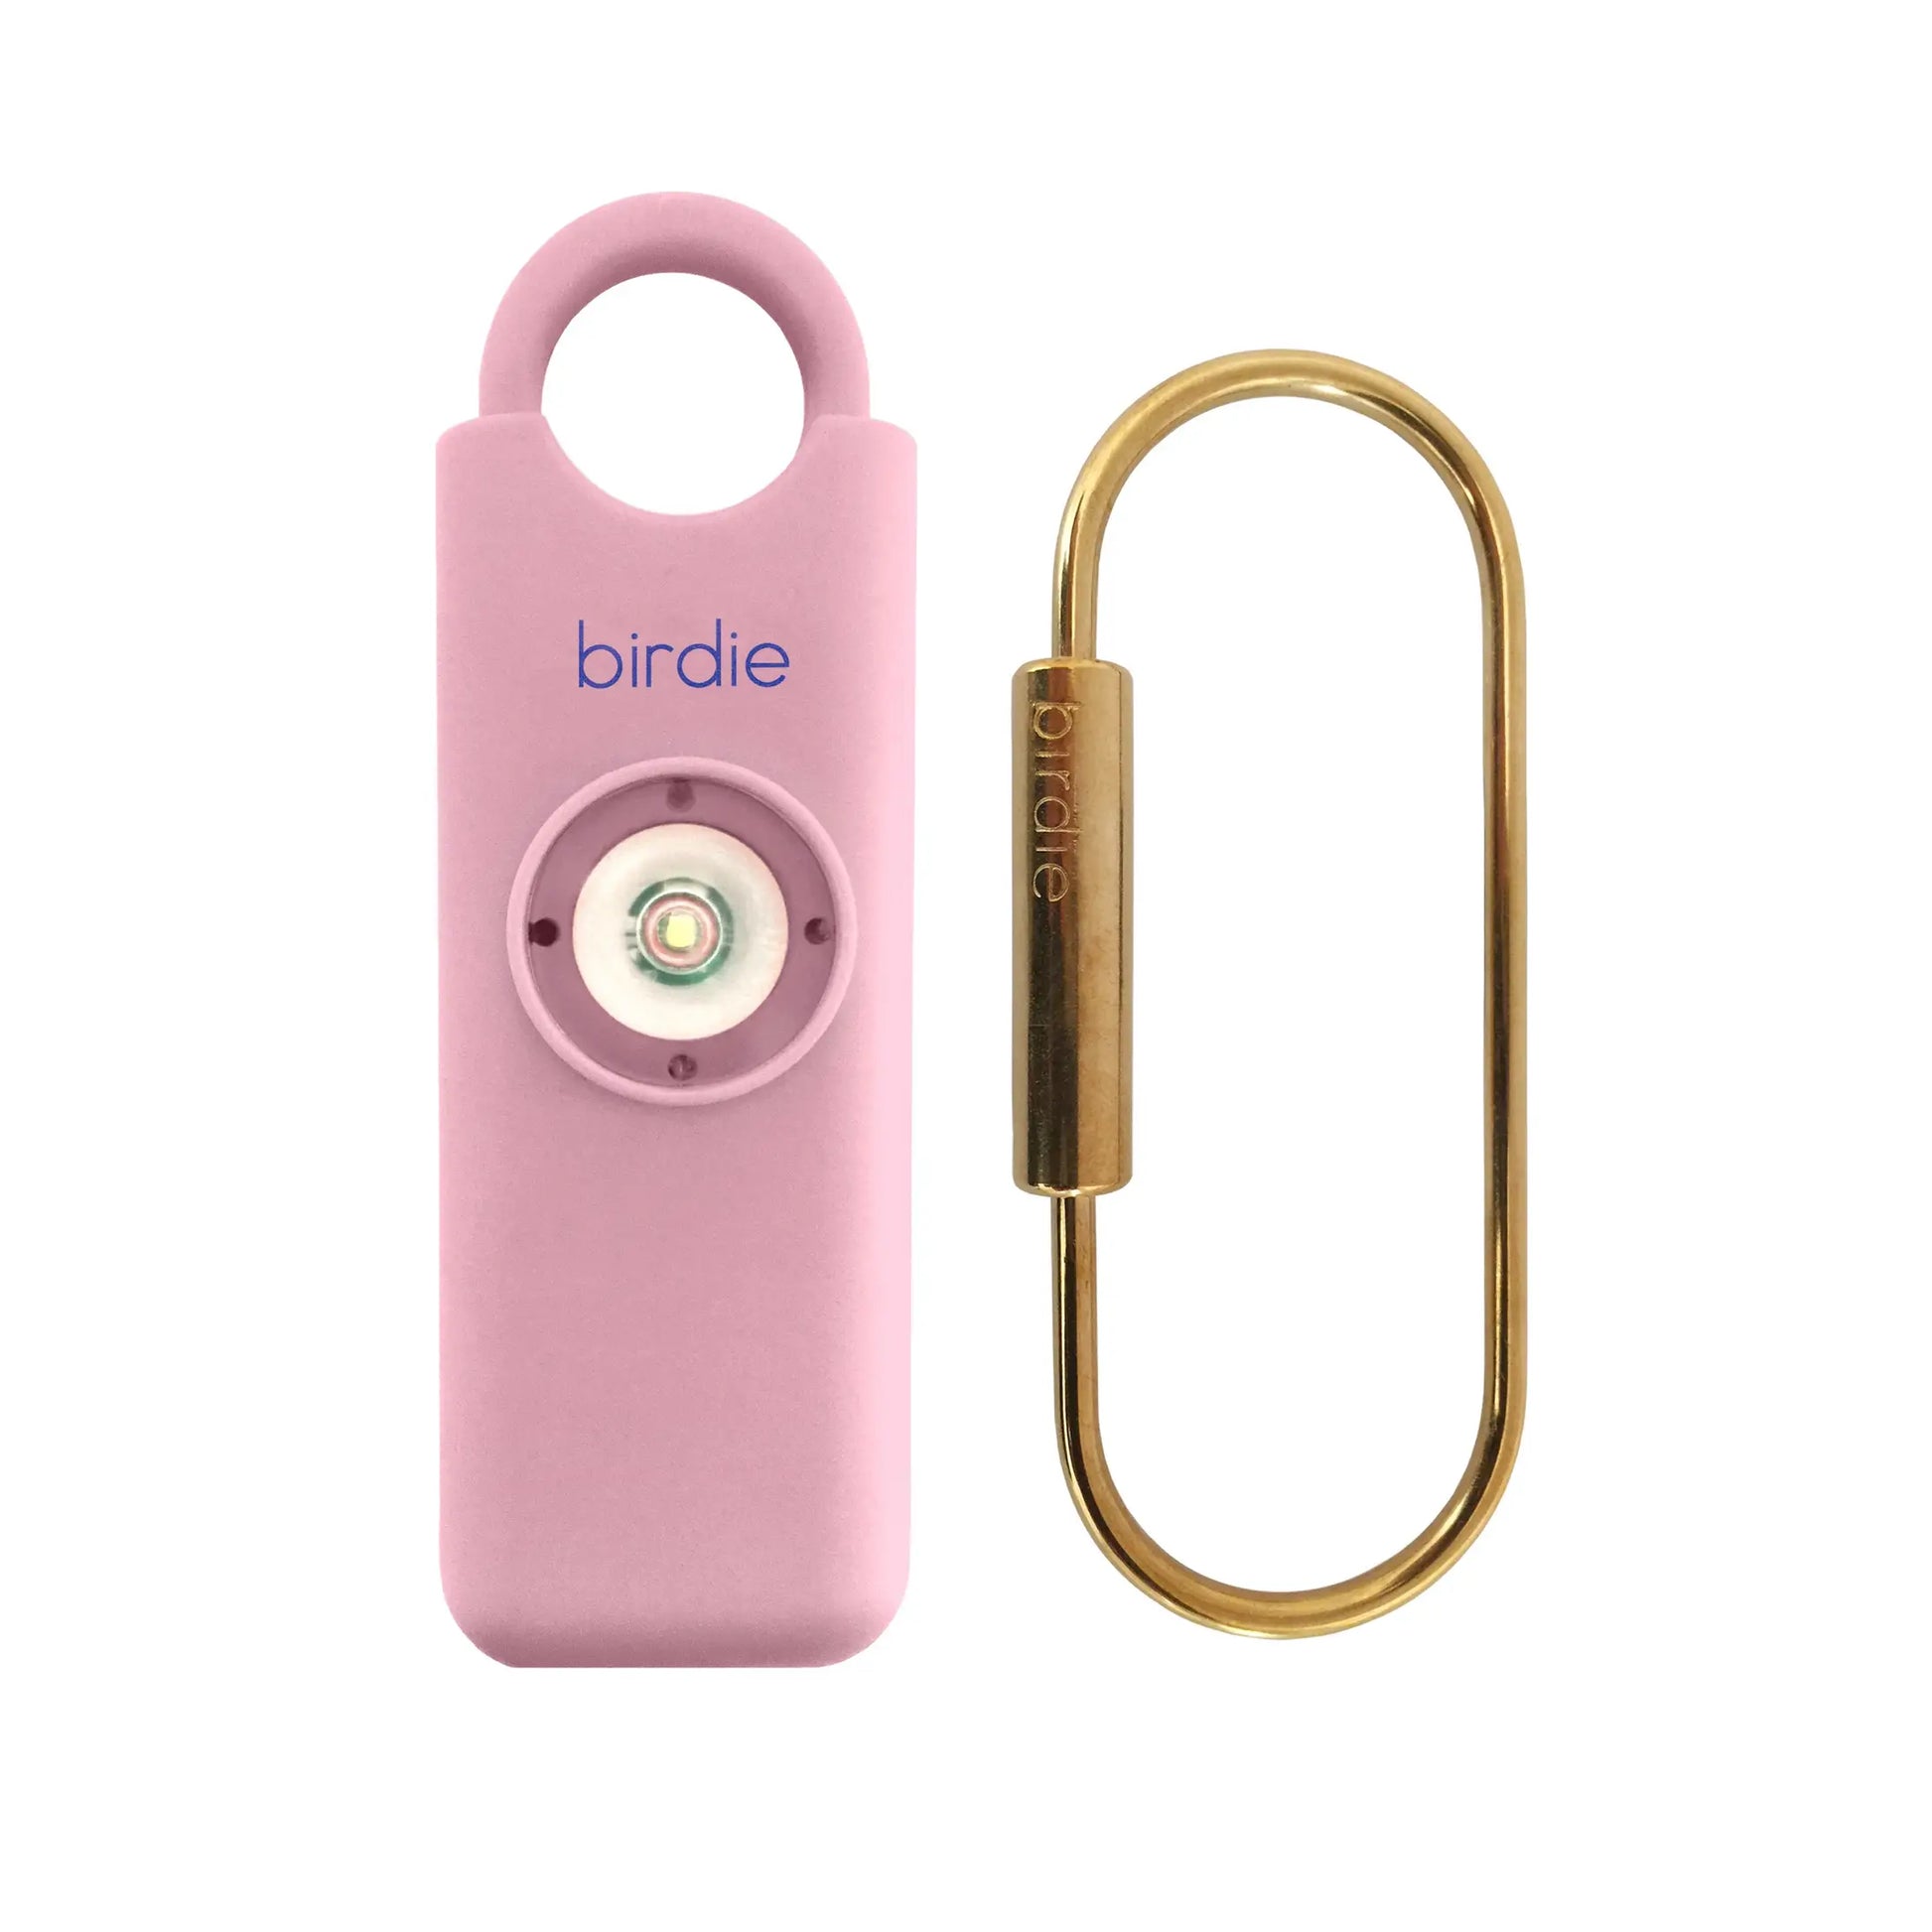 She's Birdie Personal Safety Alarm - Blossom